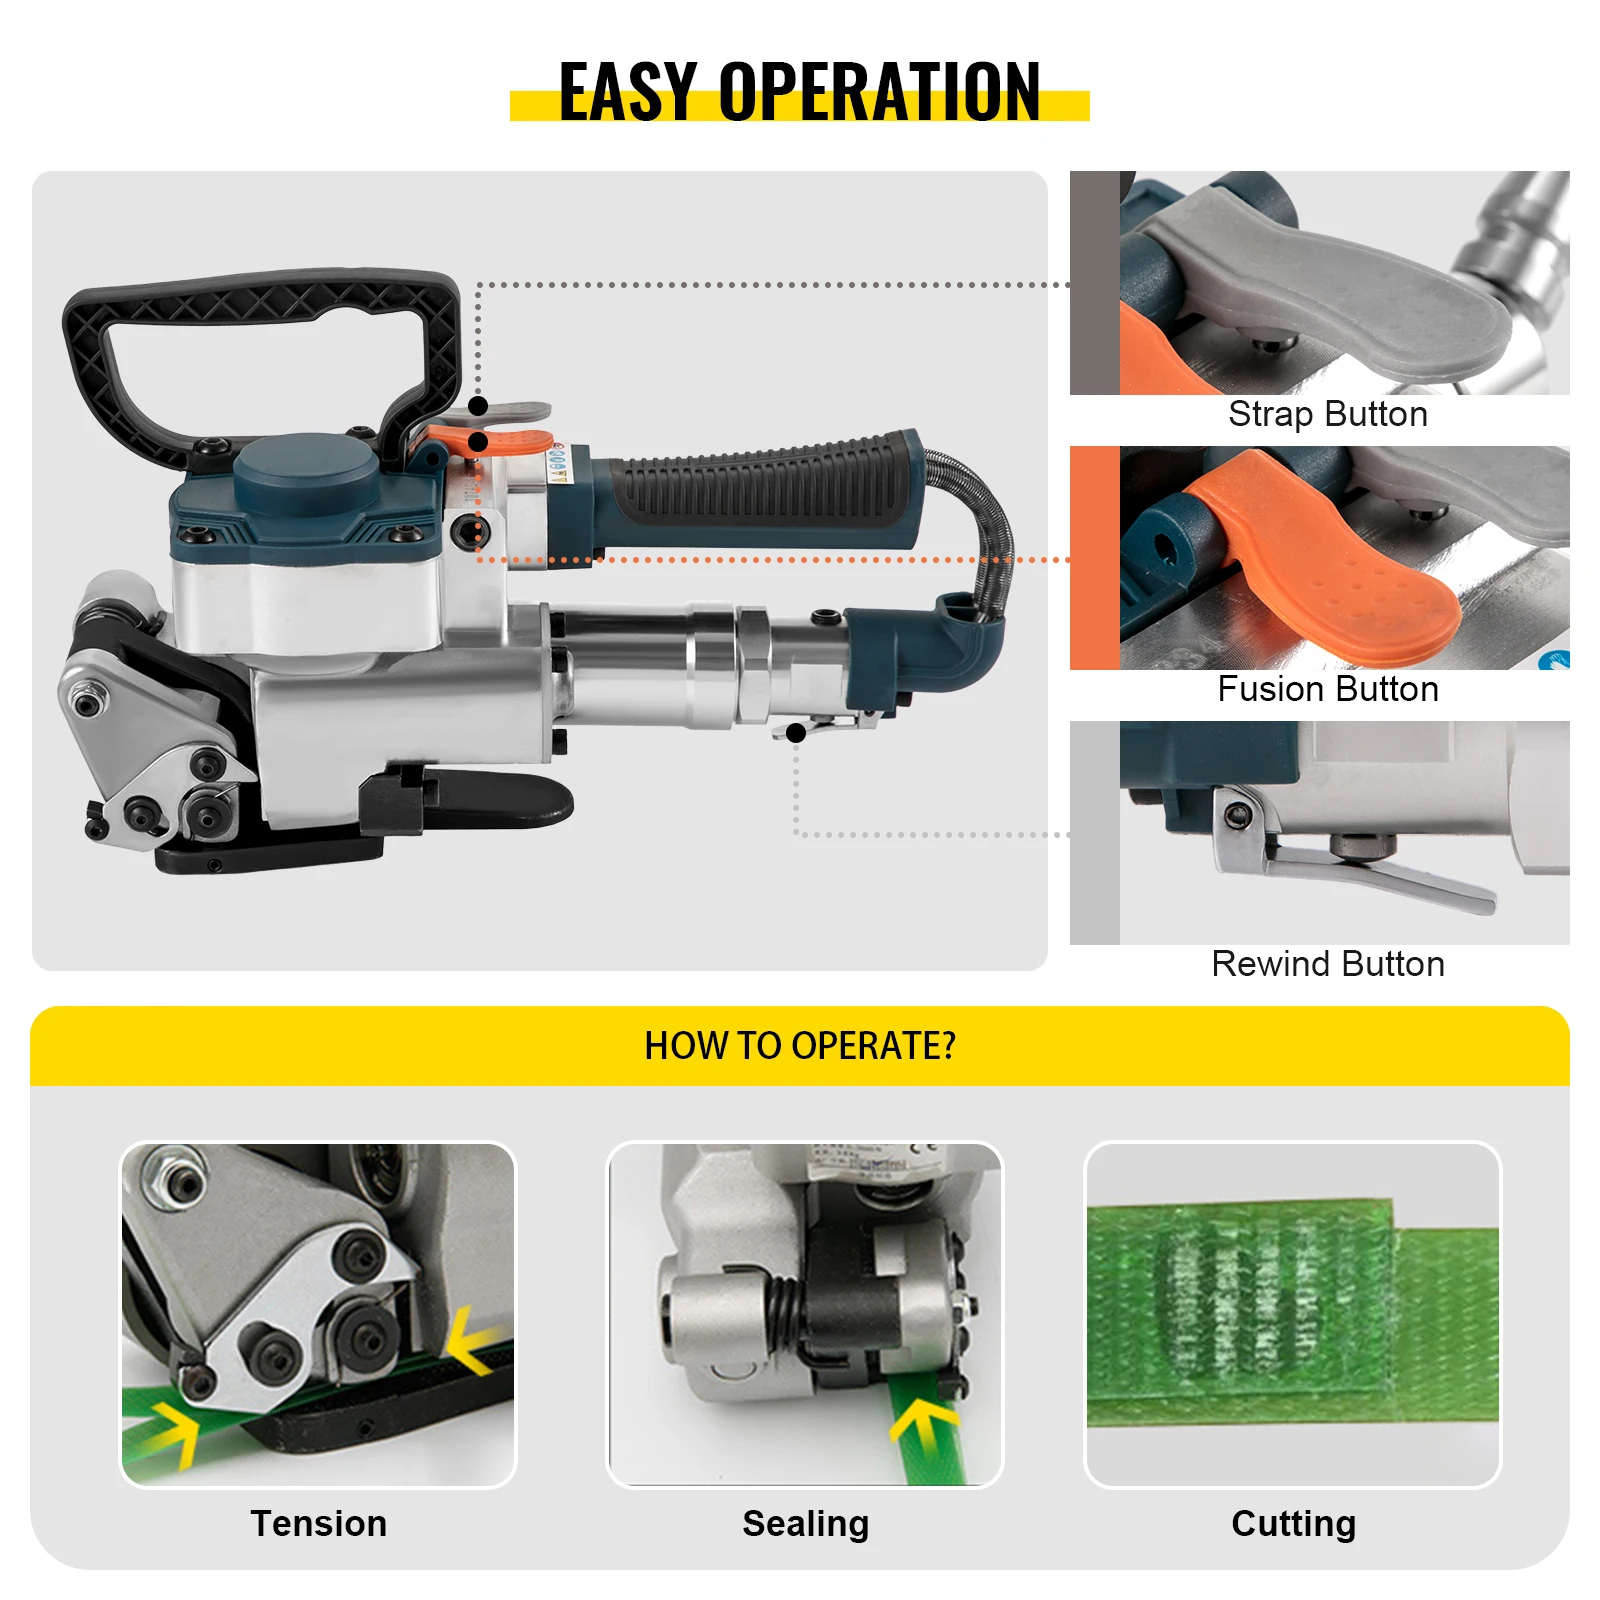 VEVOR B25 Handheld Pneumatic Strapping Machine 3500N Max Tension Hand Packing Machine Wrapping Tools for 19-25 MM PP PET Belts